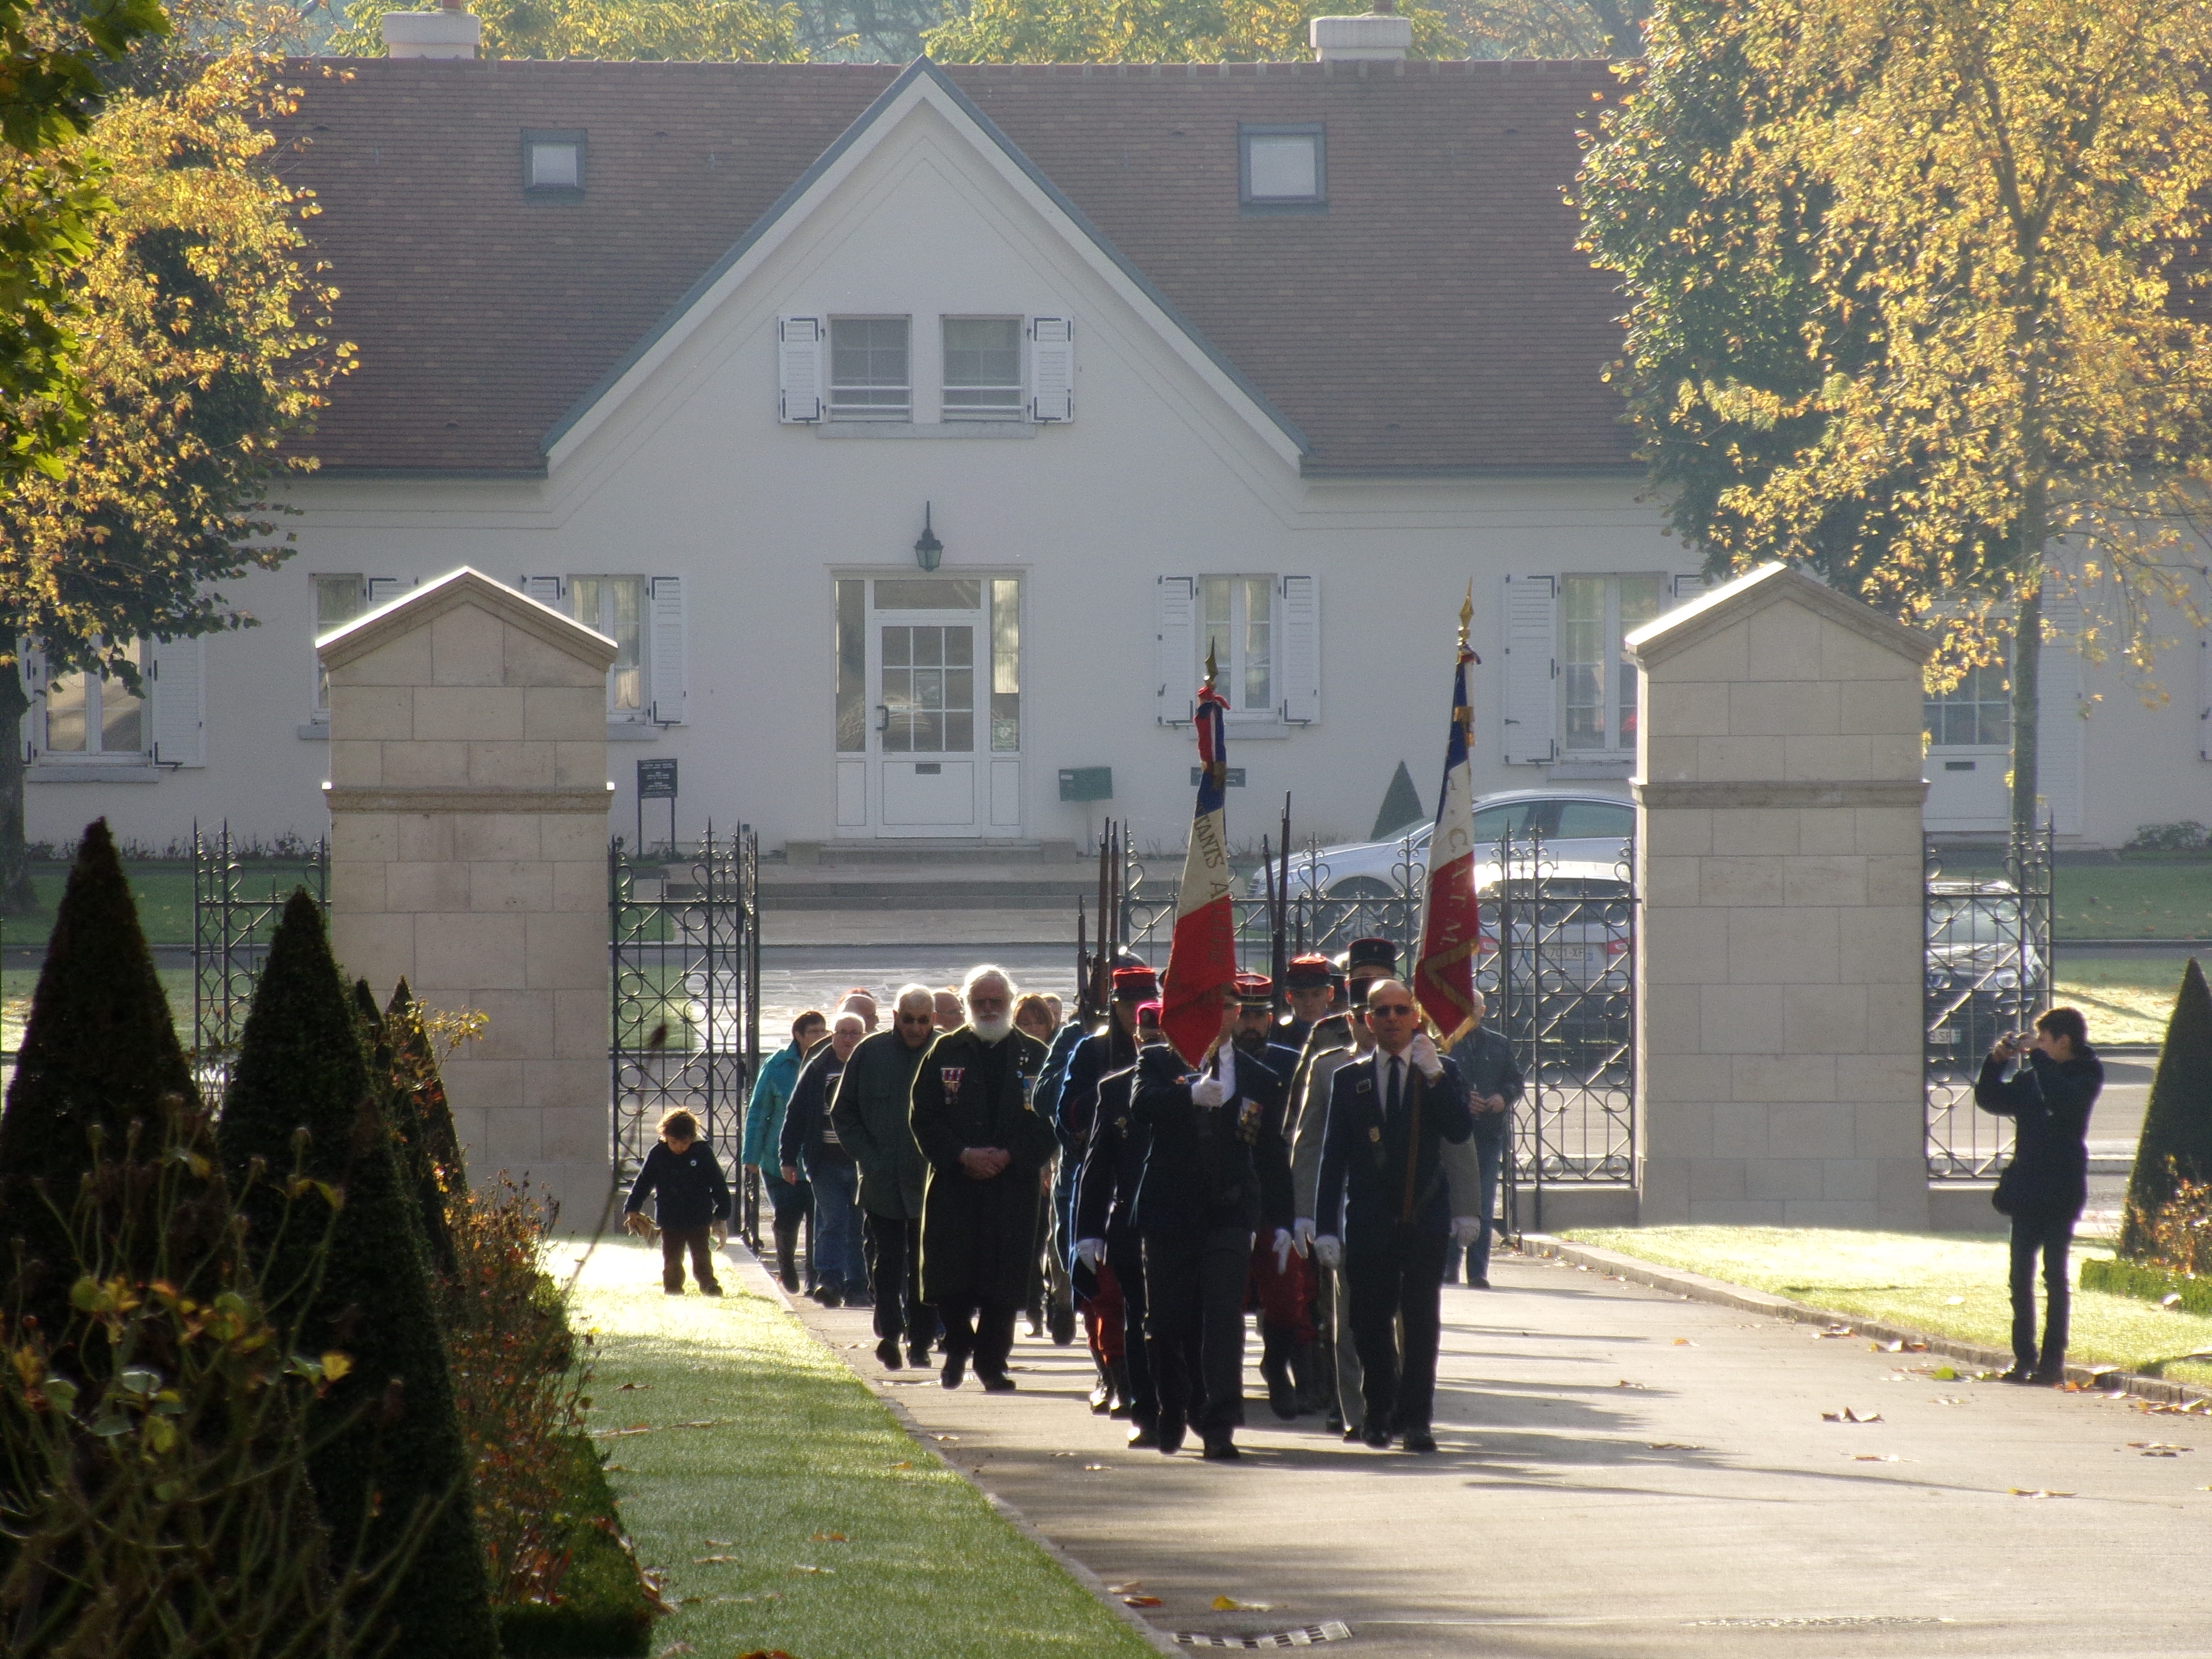 Participants march into the cemetery for the ceremony.